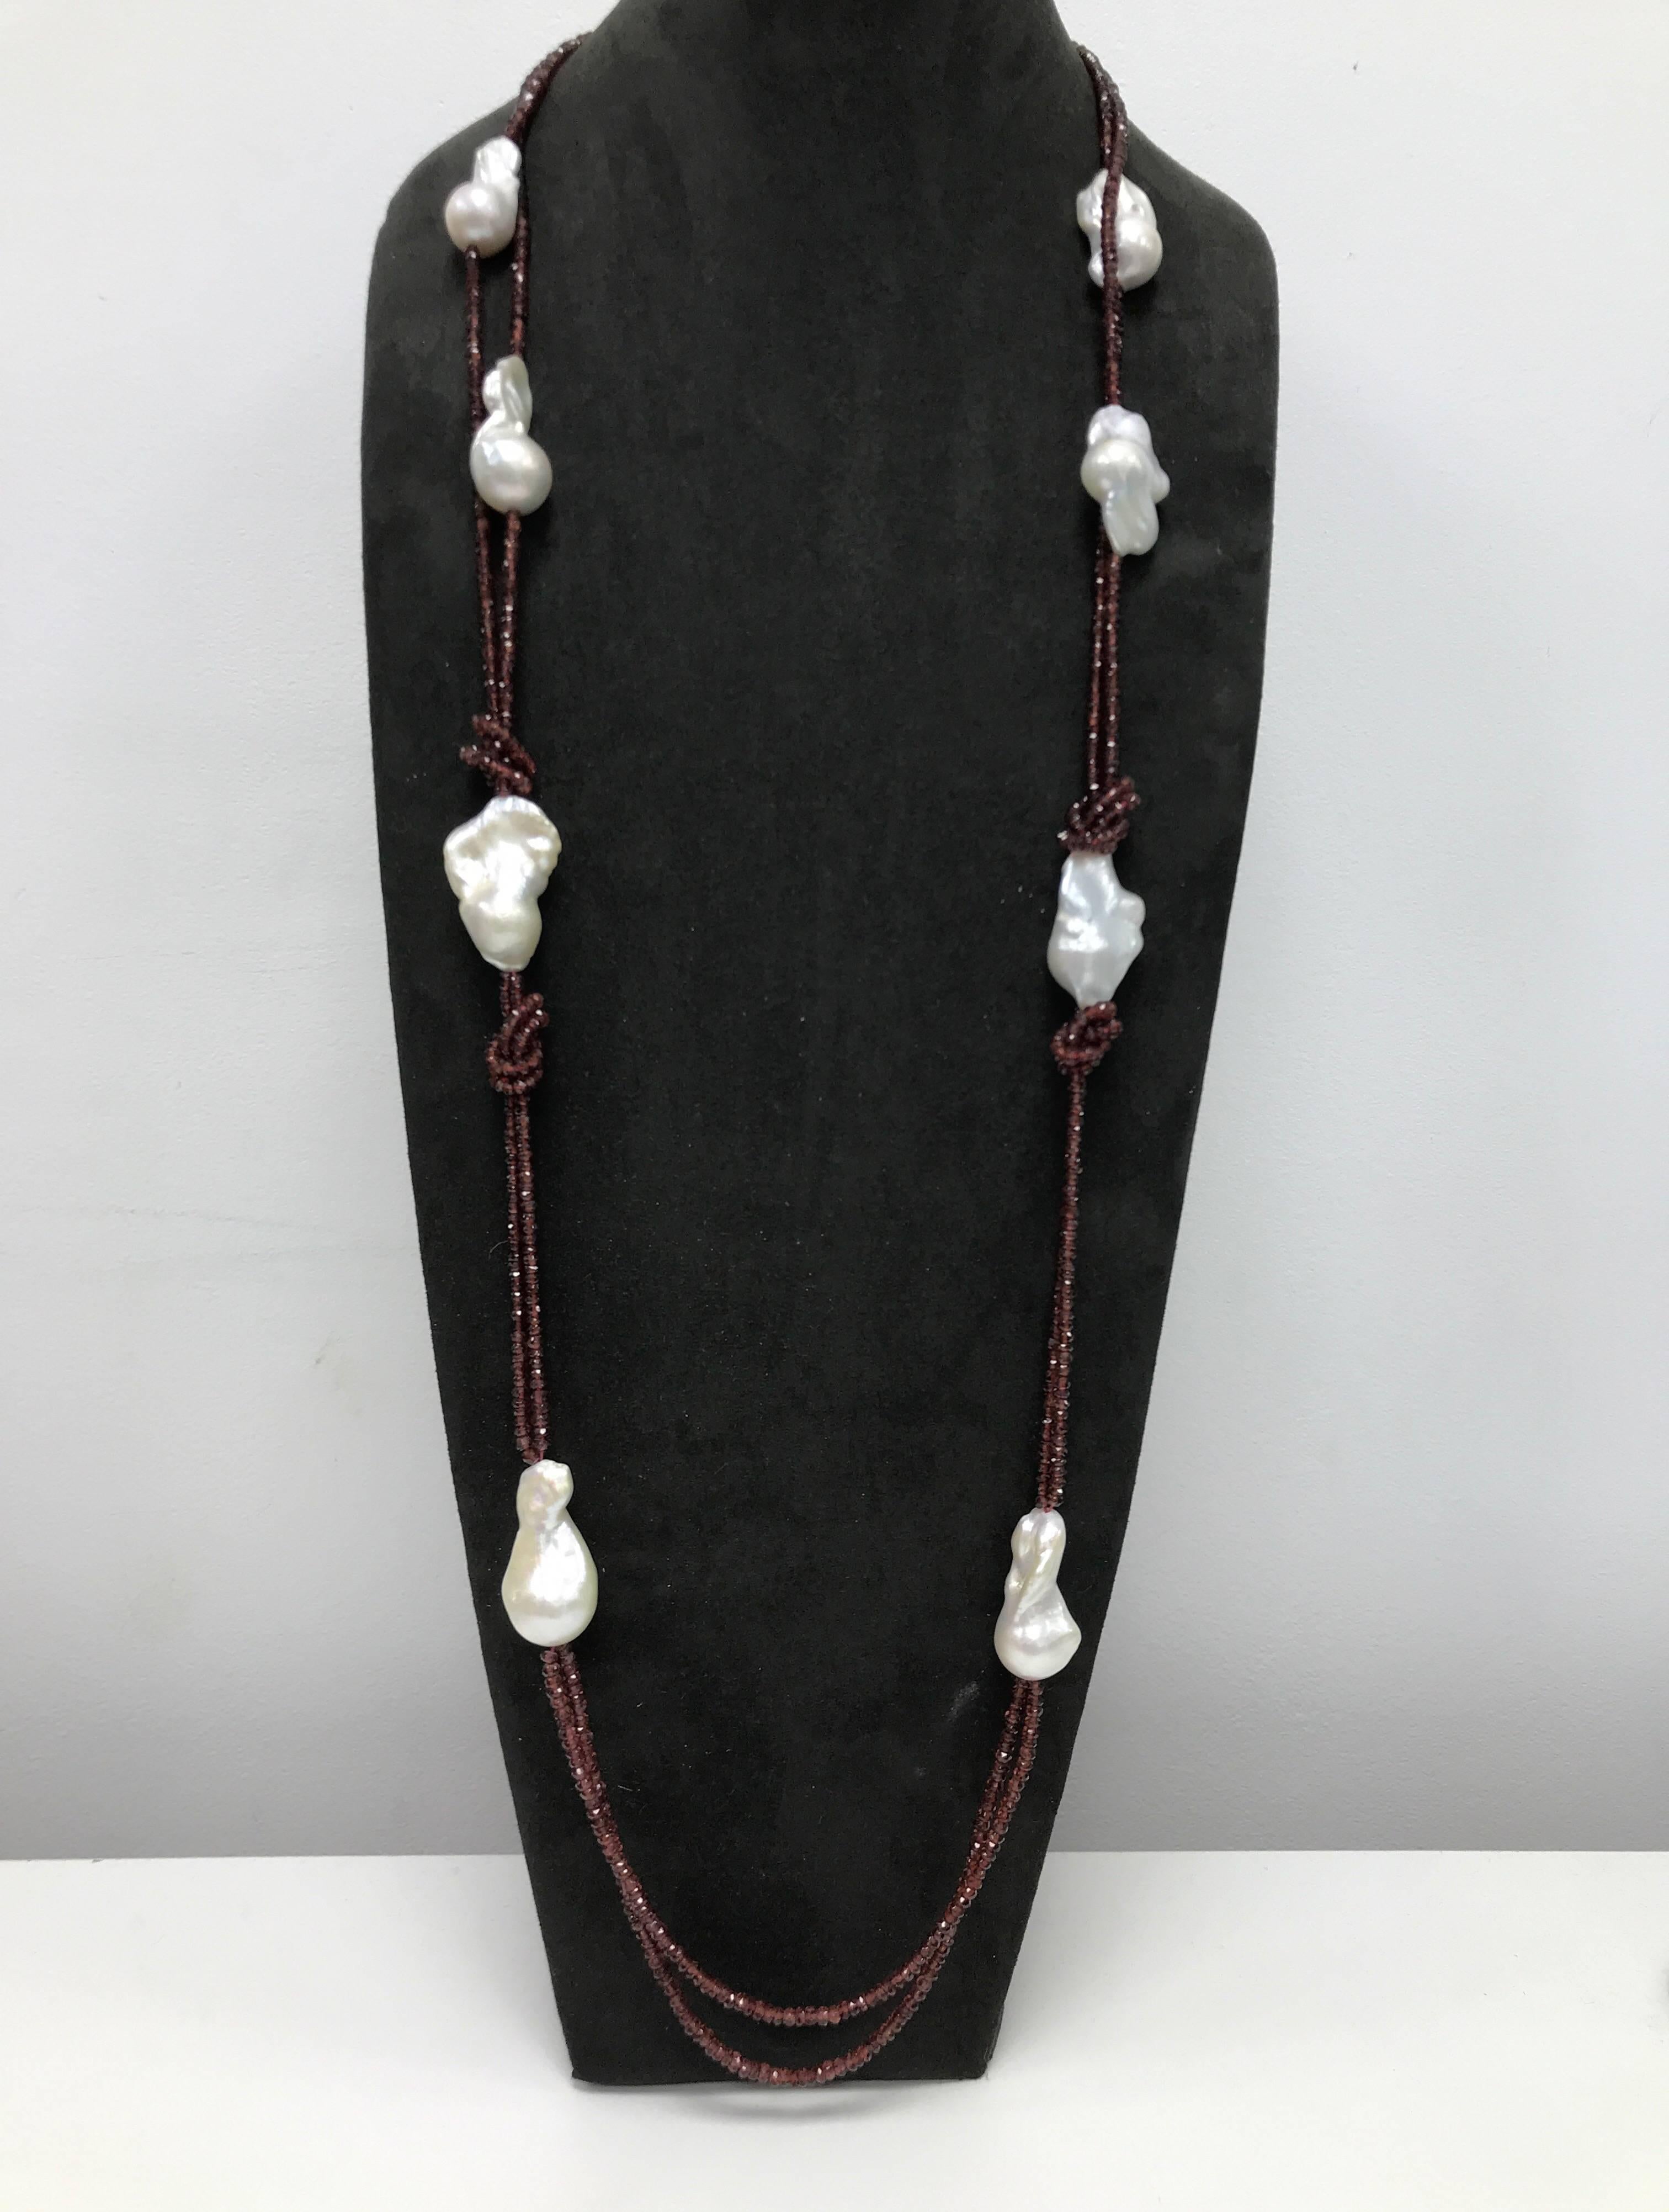 Women's Garnet and Freshwater Baroque Necklace